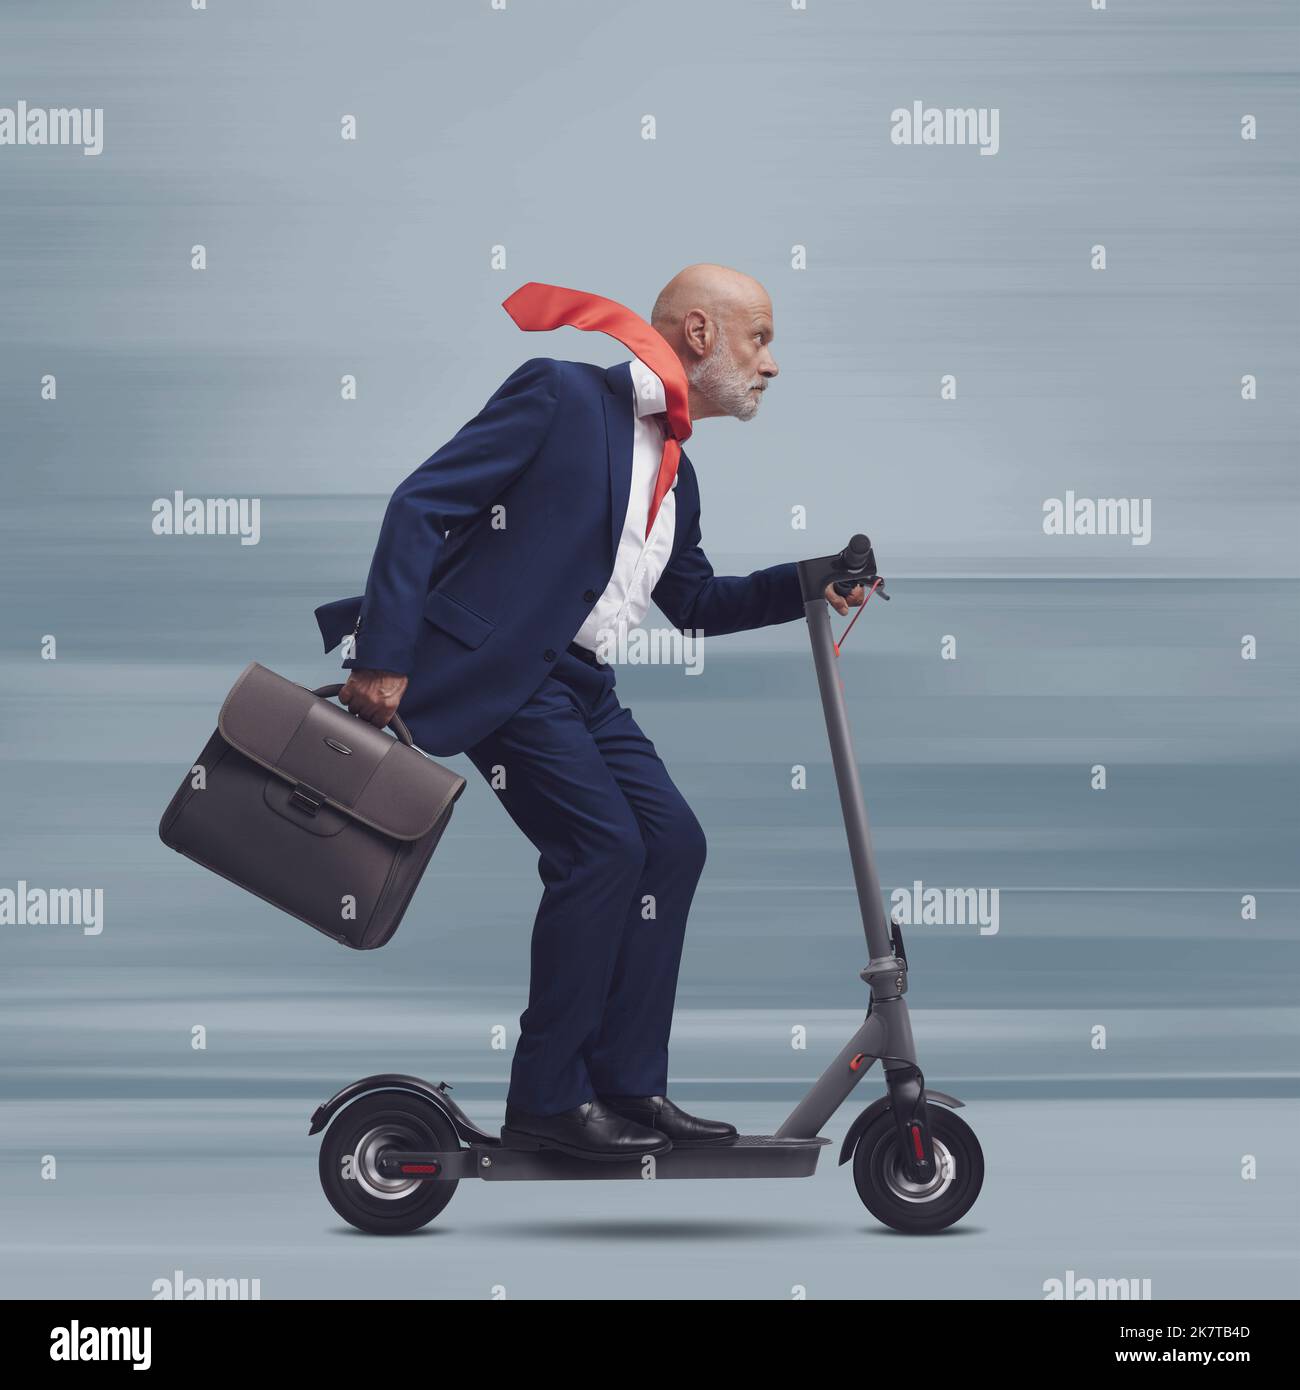 Corporate businessman riding a fast eco-friendly electric scooter, smart mobility concept Stock Photo